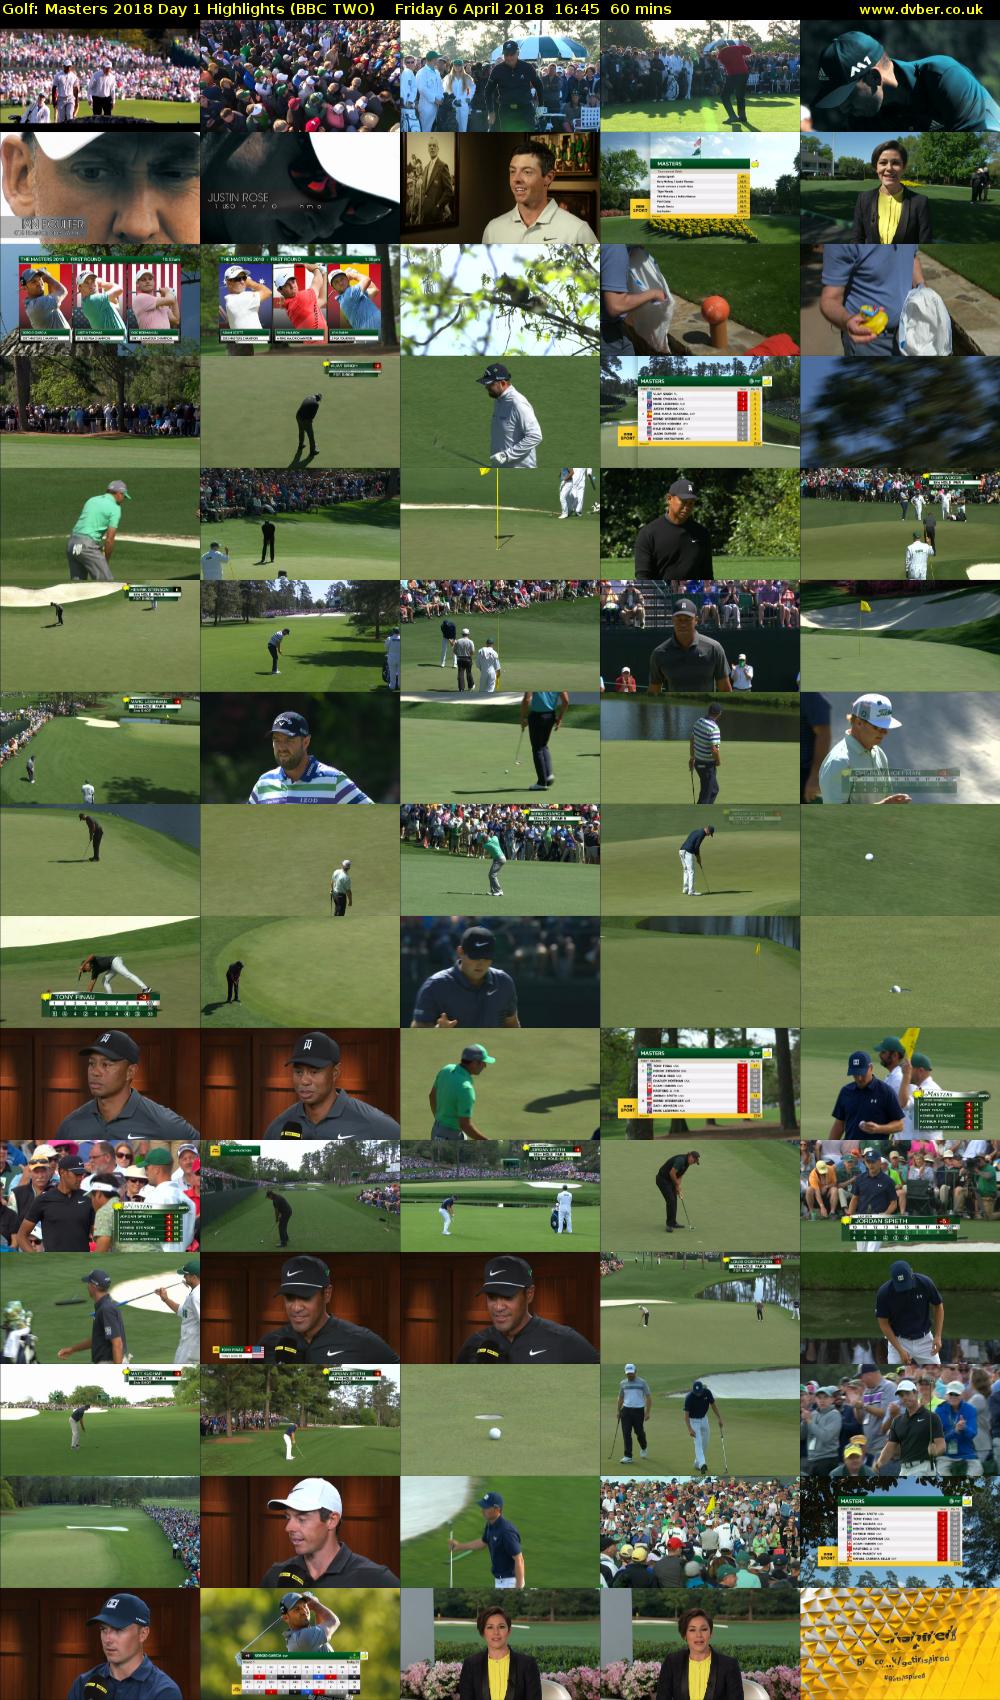 Golf: Masters 2018 Day 1 Highlights (BBC TWO) Friday 6 April 2018 17:45 - 18:45